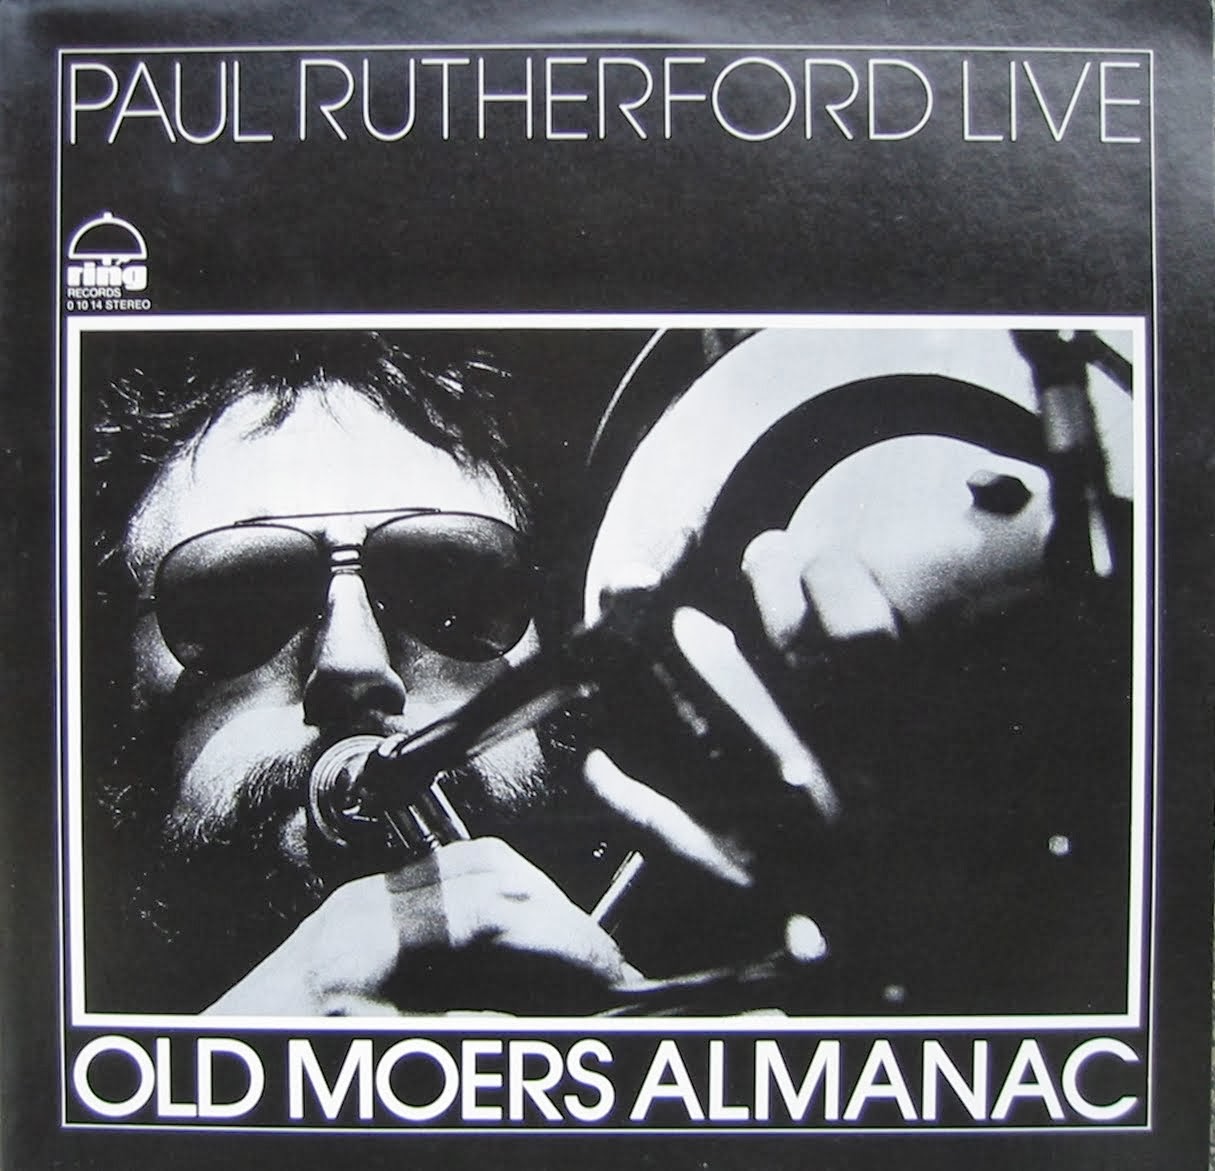 PAUL RUTHERFORD - Paul Rutherford Live - Old Moers Almanac cover 